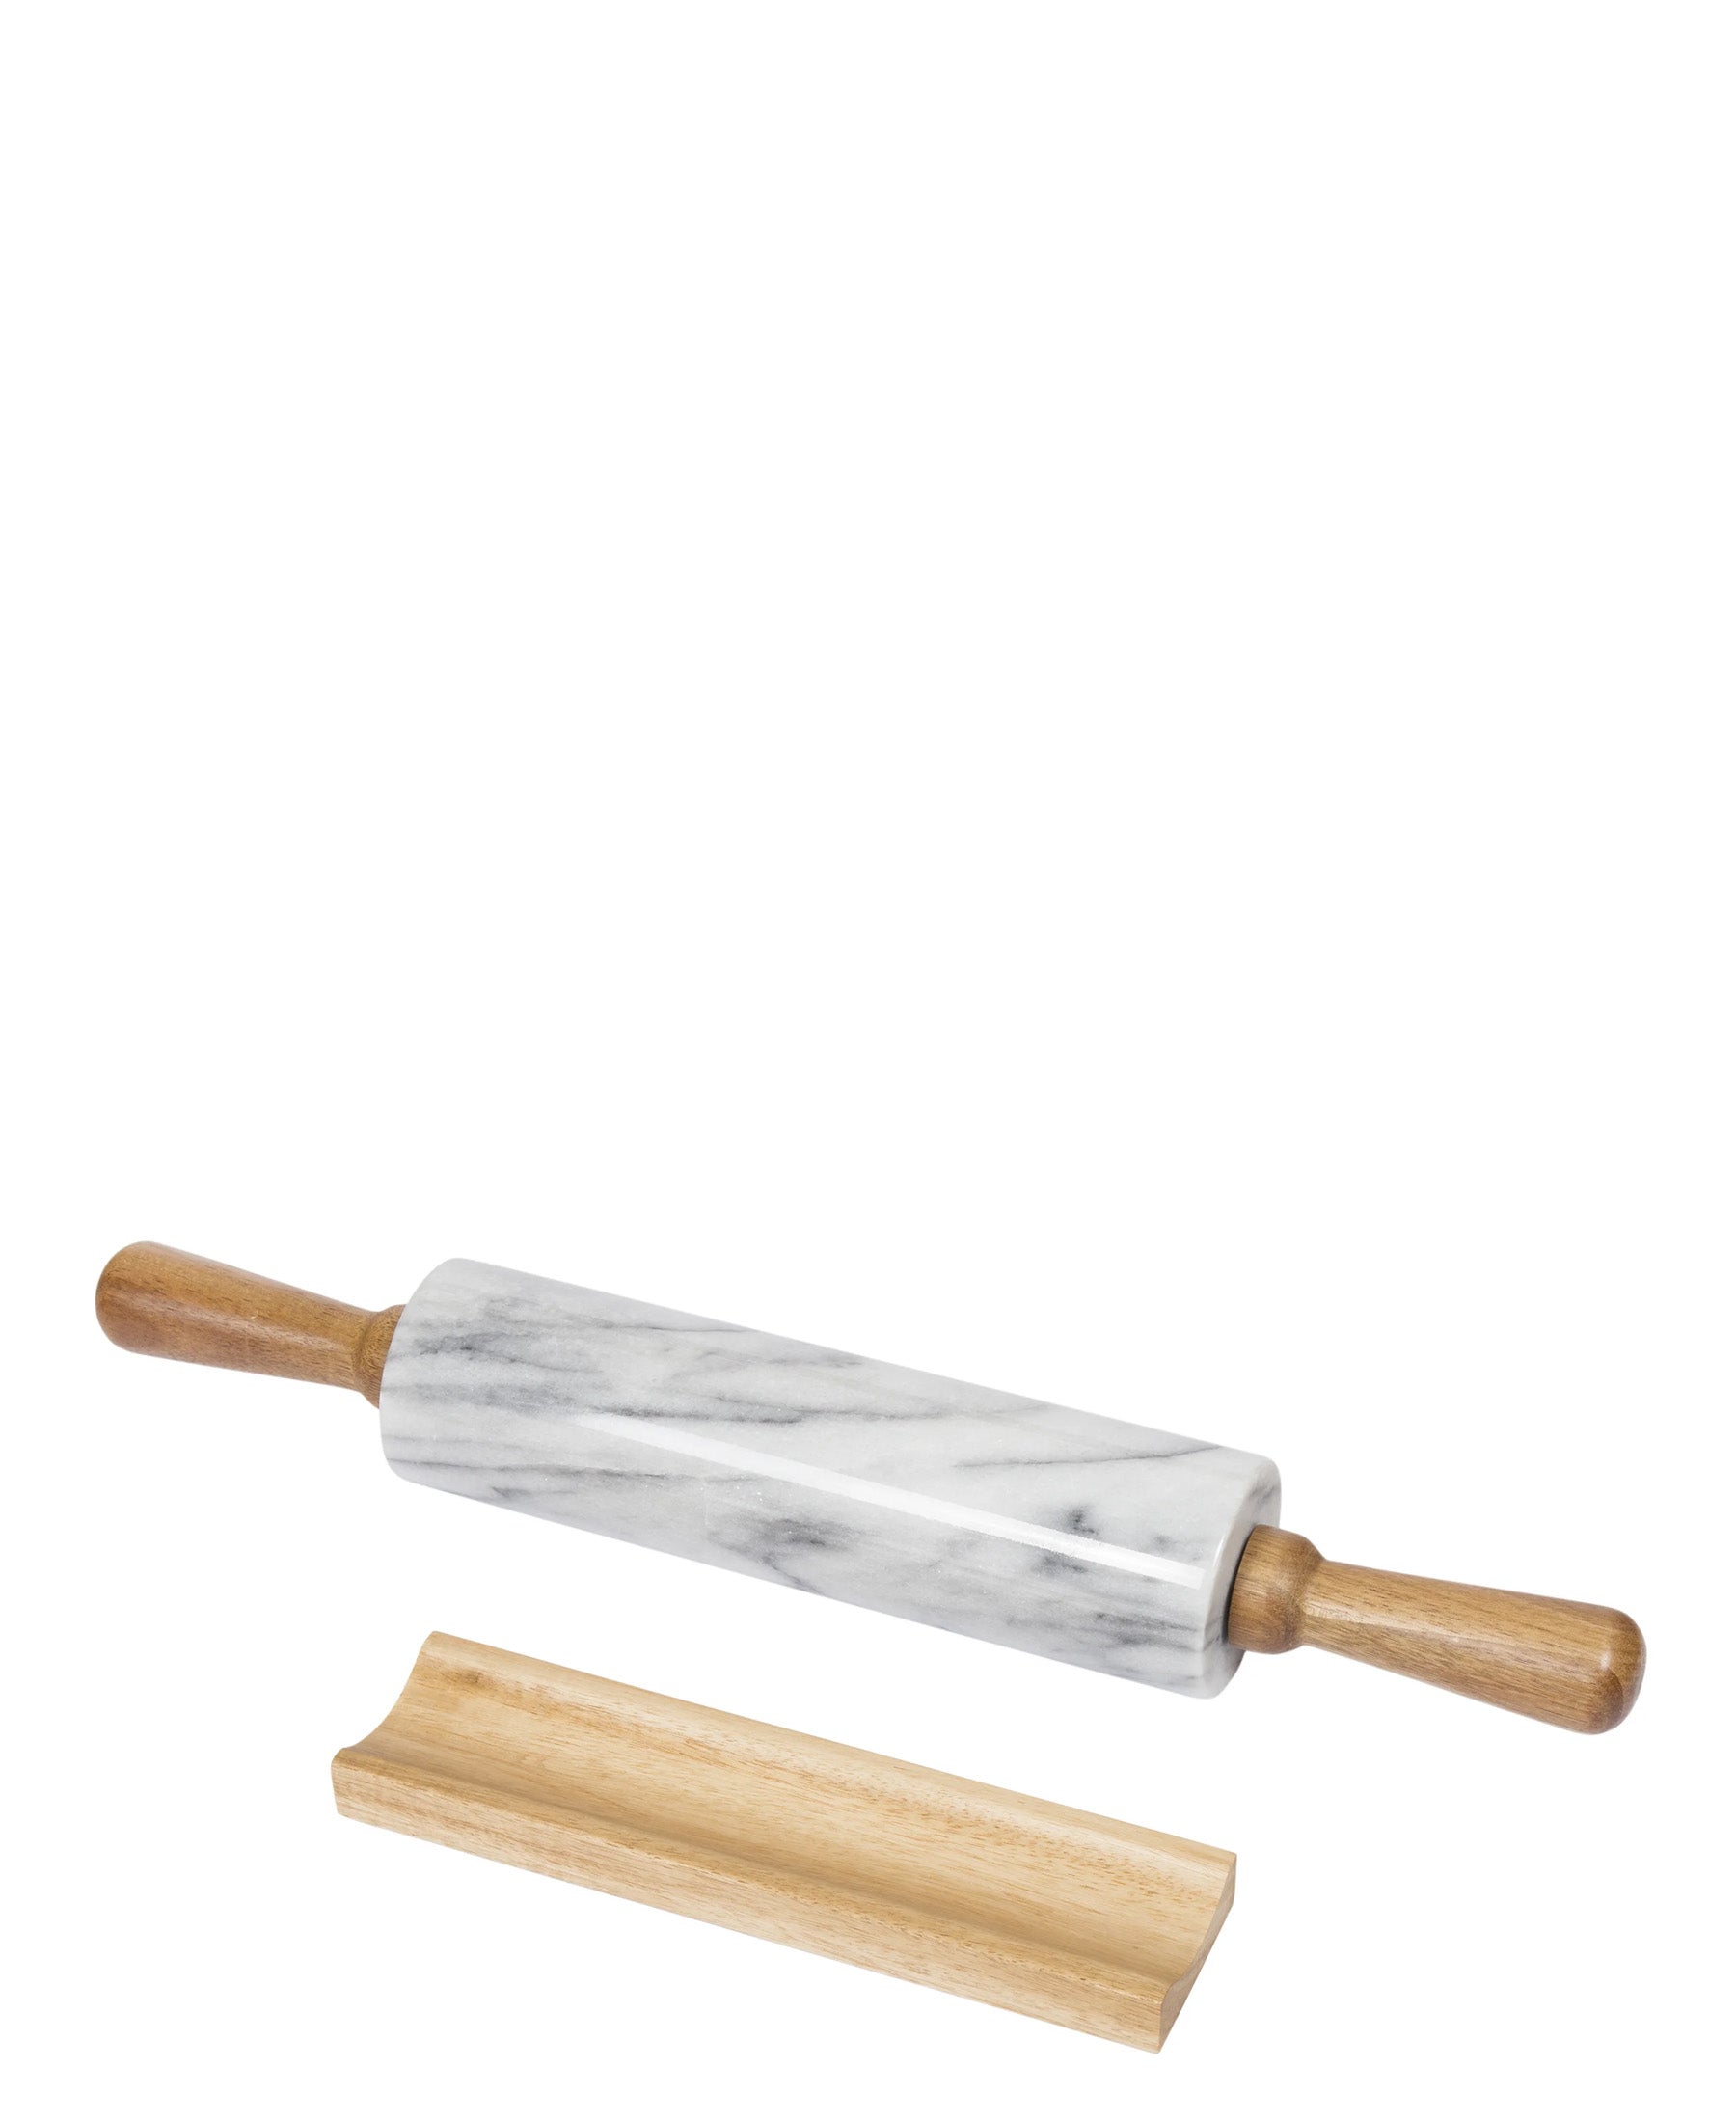 Hillhouse Marble Rolling Pin with Wooden Handles - White & Grey